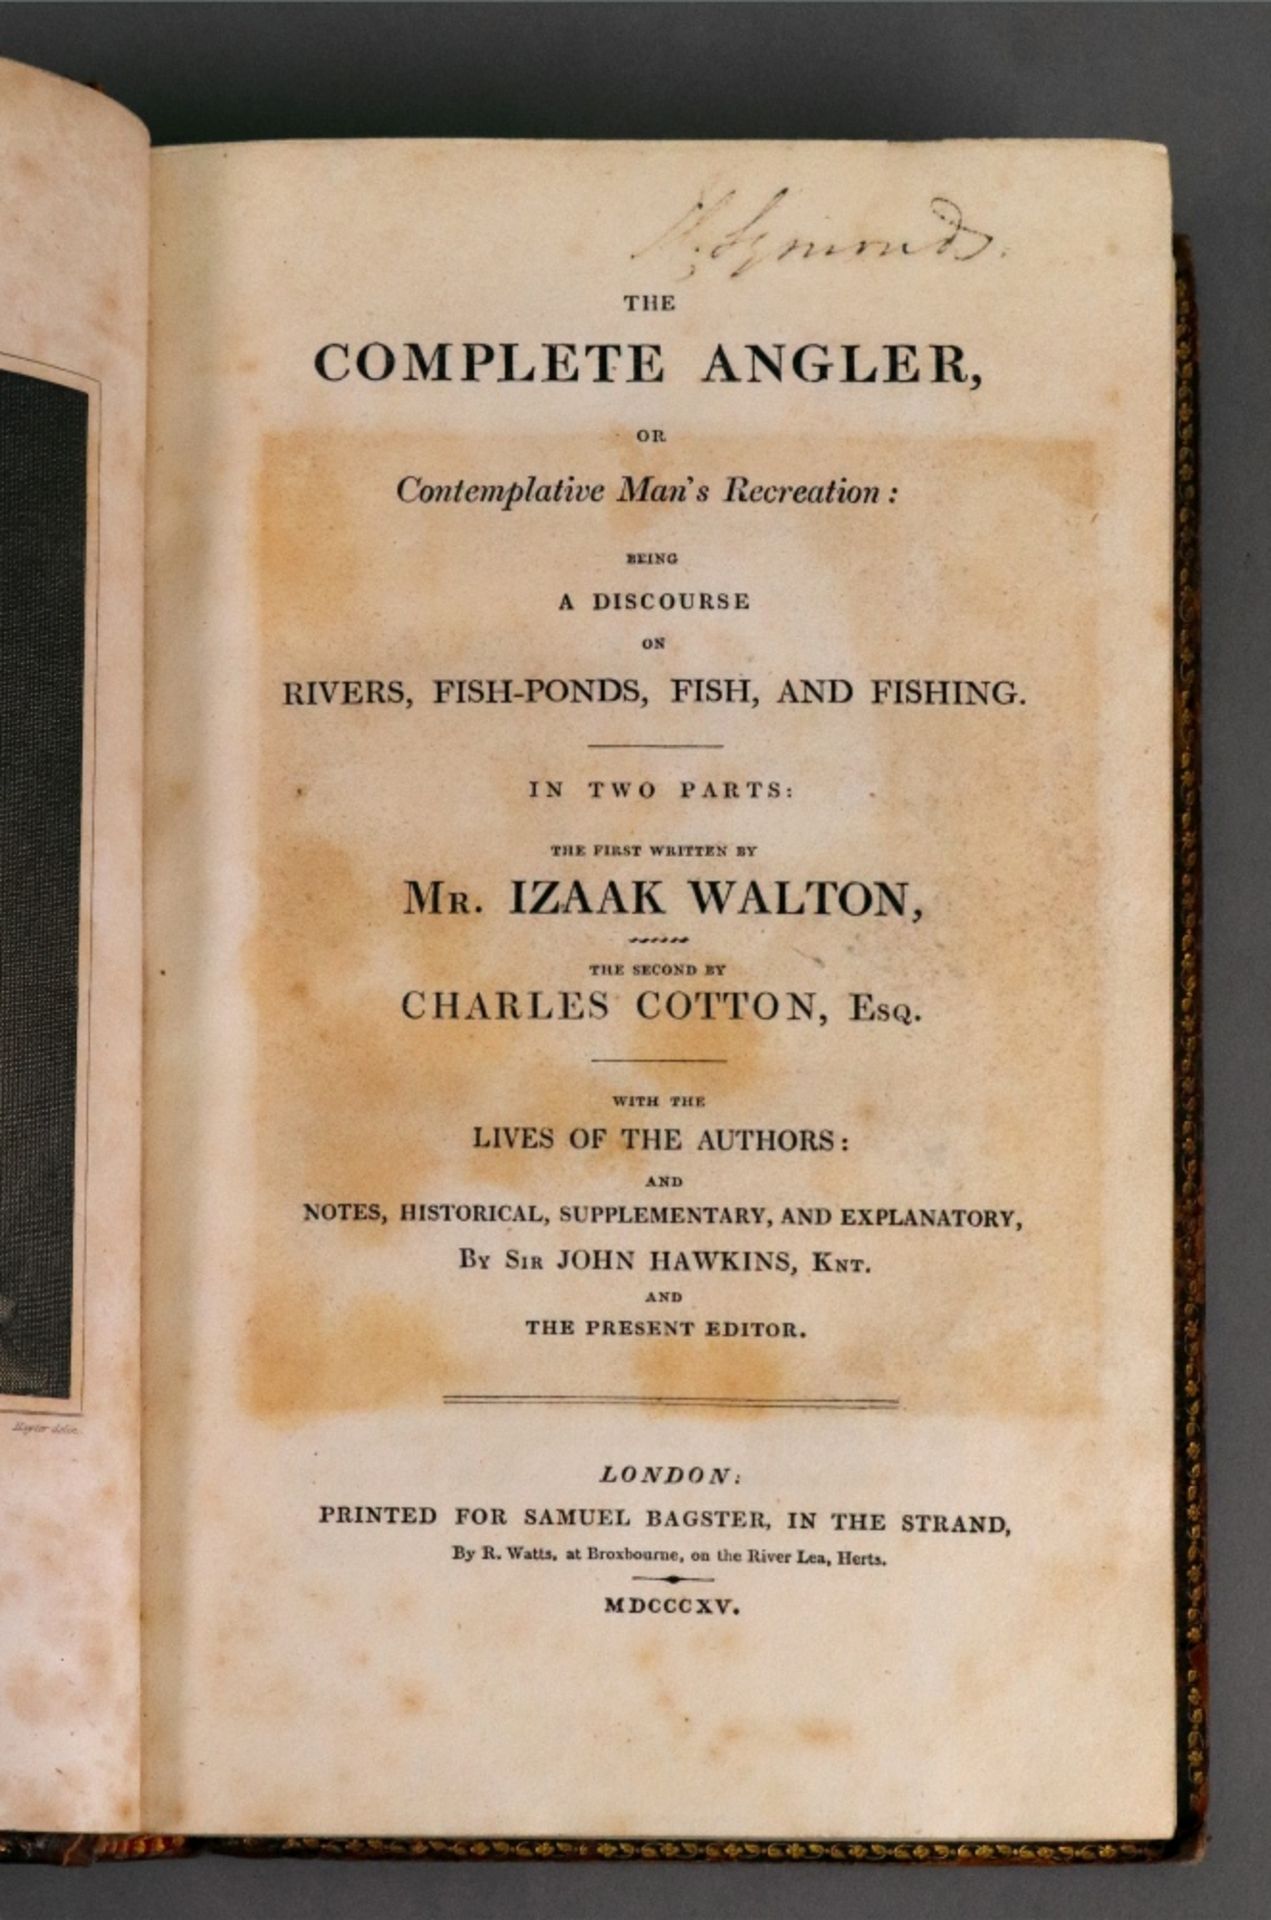 WALTON (Izaak) & COTTON (Charles) The Complete Angler, Bagster's second edition,